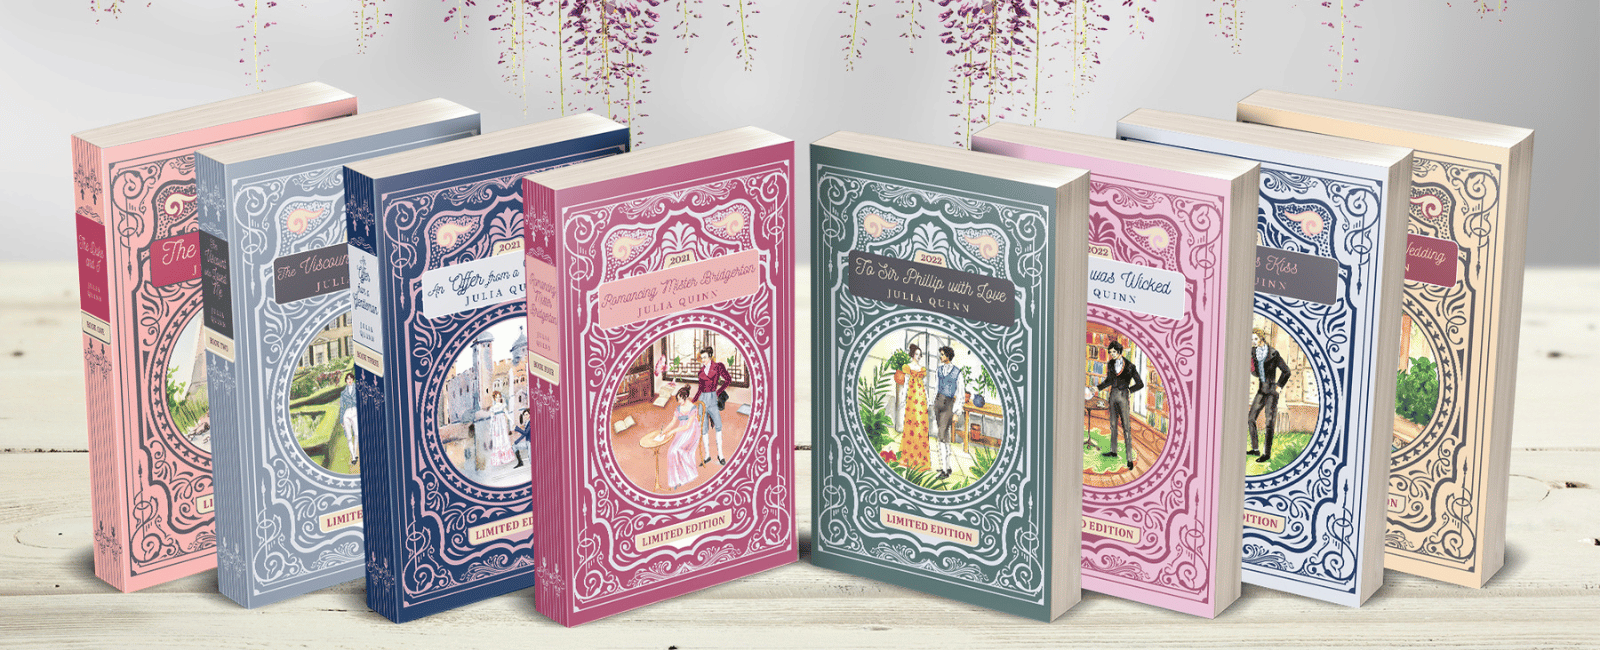 hardcover special editions of Bridgerton Books 1-8 stand in order from left to right